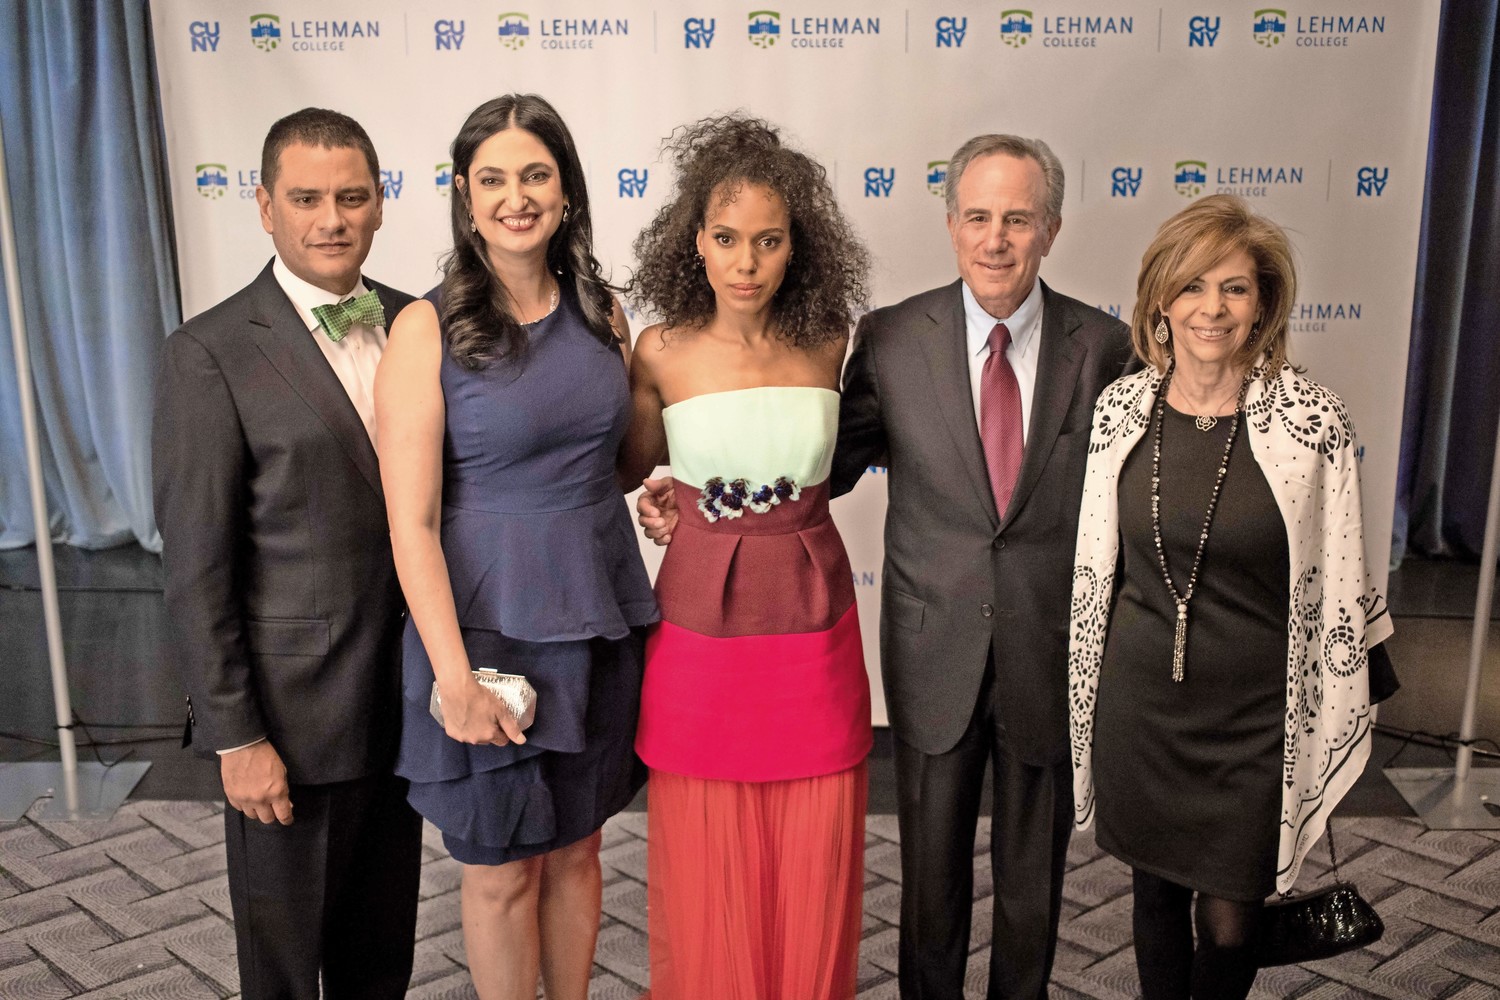 Lehman College honored the actress Kerry Washington with an award for artistic achievement at its 2018 gala.